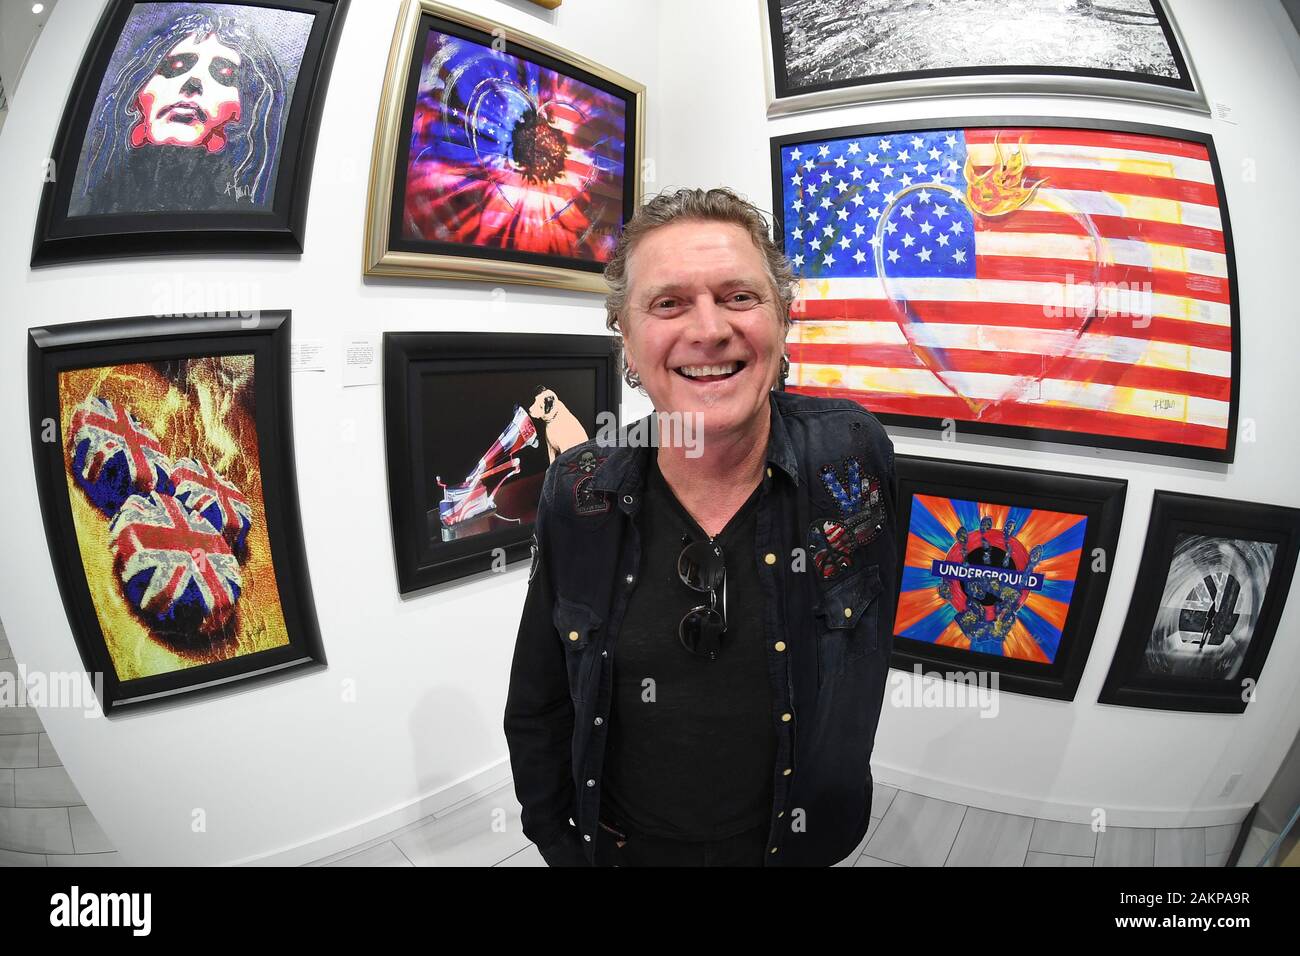 Hollywood FL, USA. 09th Jan, 2020. Rick Allen of Def Leppard art exhibition at the Wentworth Gallery at the Seminole Hard Rock Hotel & Casino on January 9, 2020 in Hollywood, Florida. Credit: Mpi04/Media Punch/Alamy Live News Stock Photo